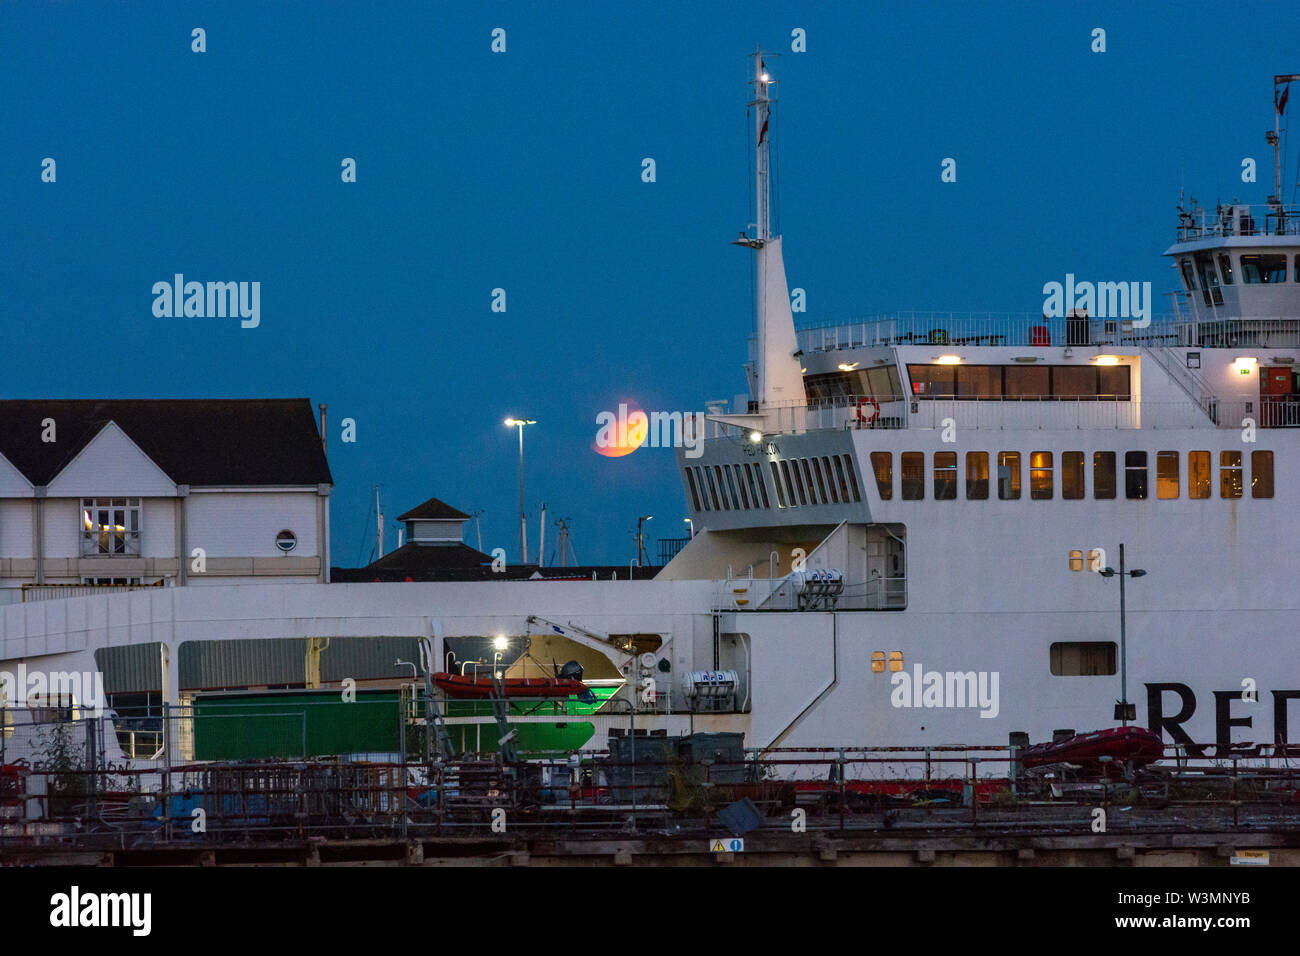 Partial lunar eclipse, Southampton, Hampshire, England, UK, 16th July 2019. A partial lunar eclipse and a hazy sky on the horizon turn the moon orange red during evening moonrise over the south coast. In the foreground, the Red Falcon Red Funnel Isle of Wight ferry has just docked in the port for disembarkation. Stock Photo